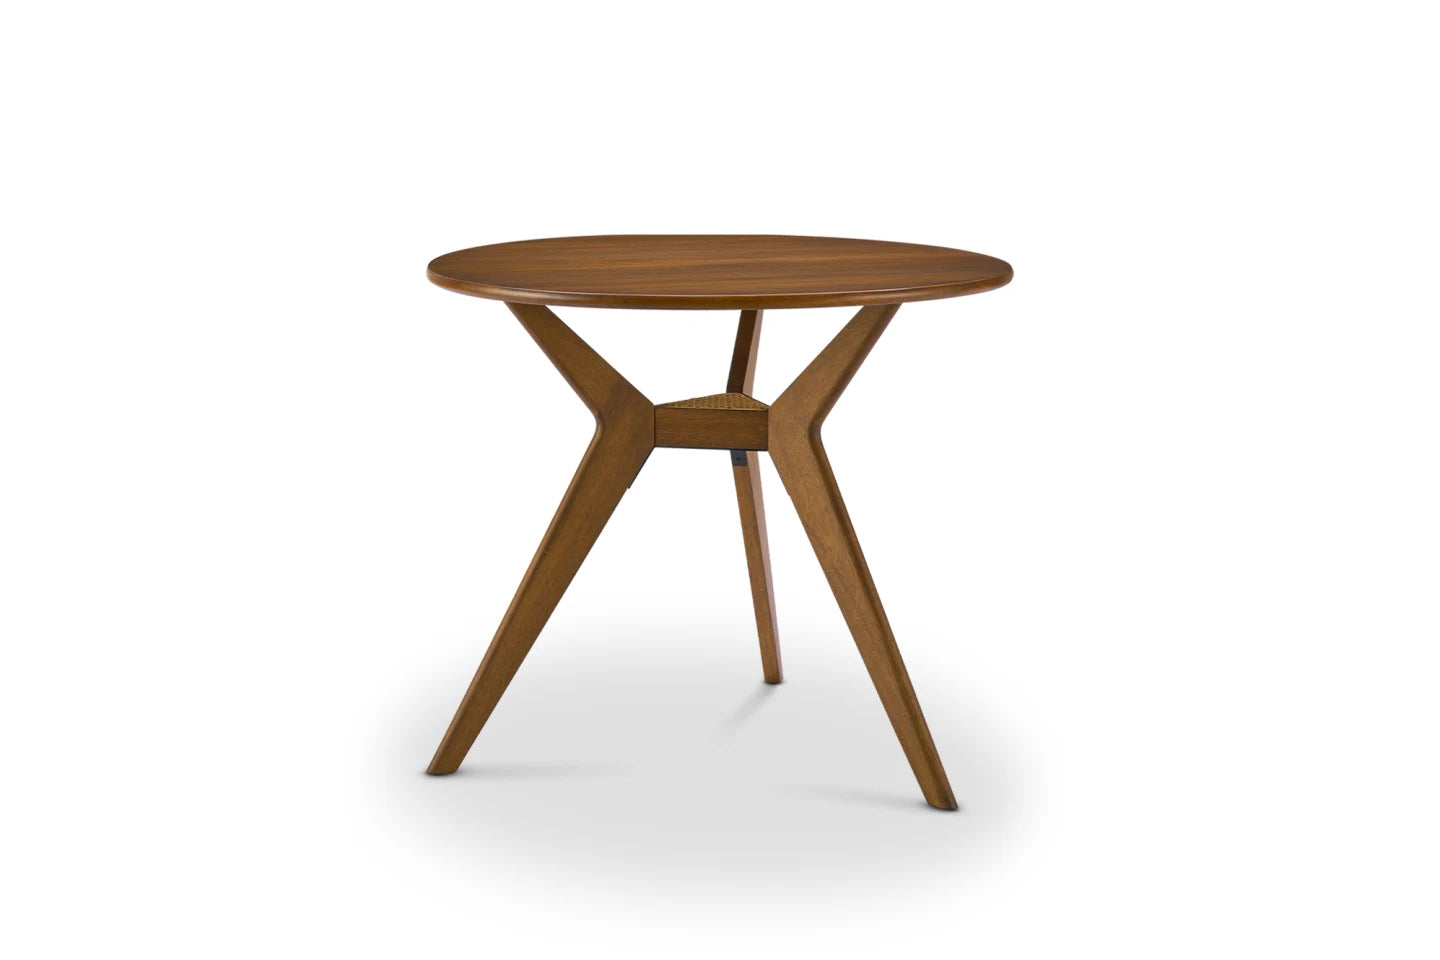 Tribeca Round Dining Table